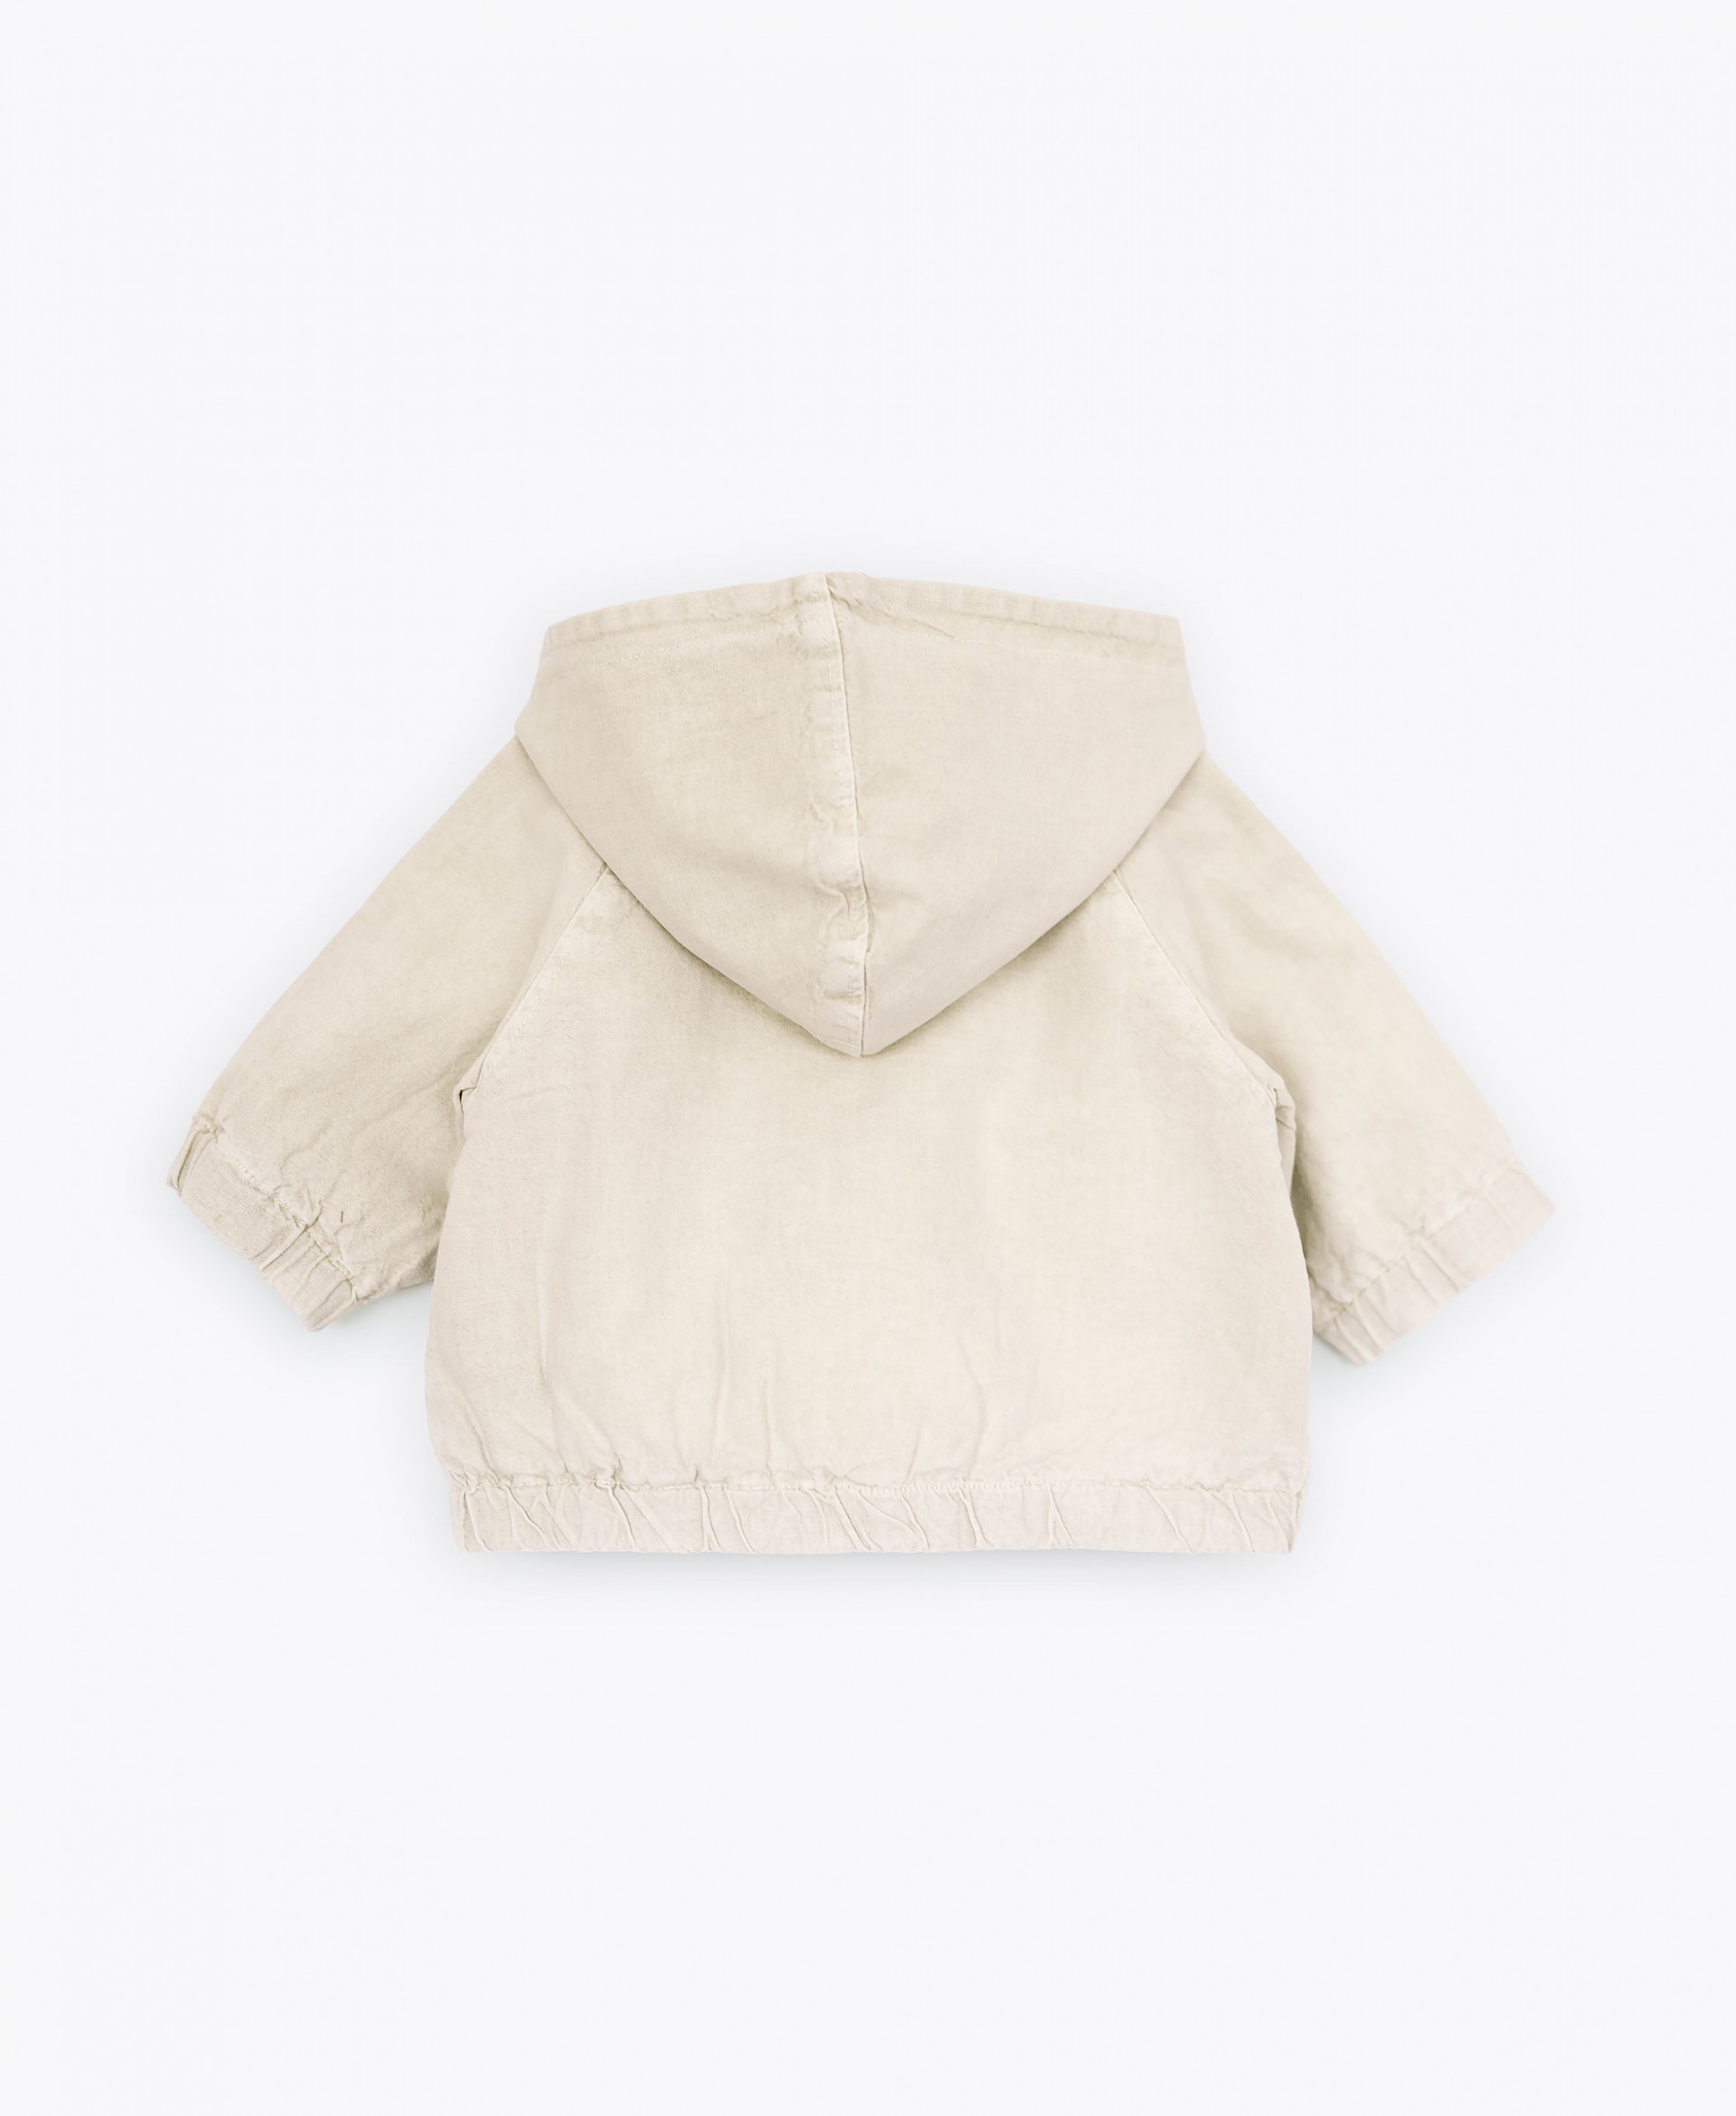 Twill jacket with organic cotton lining | Basketry